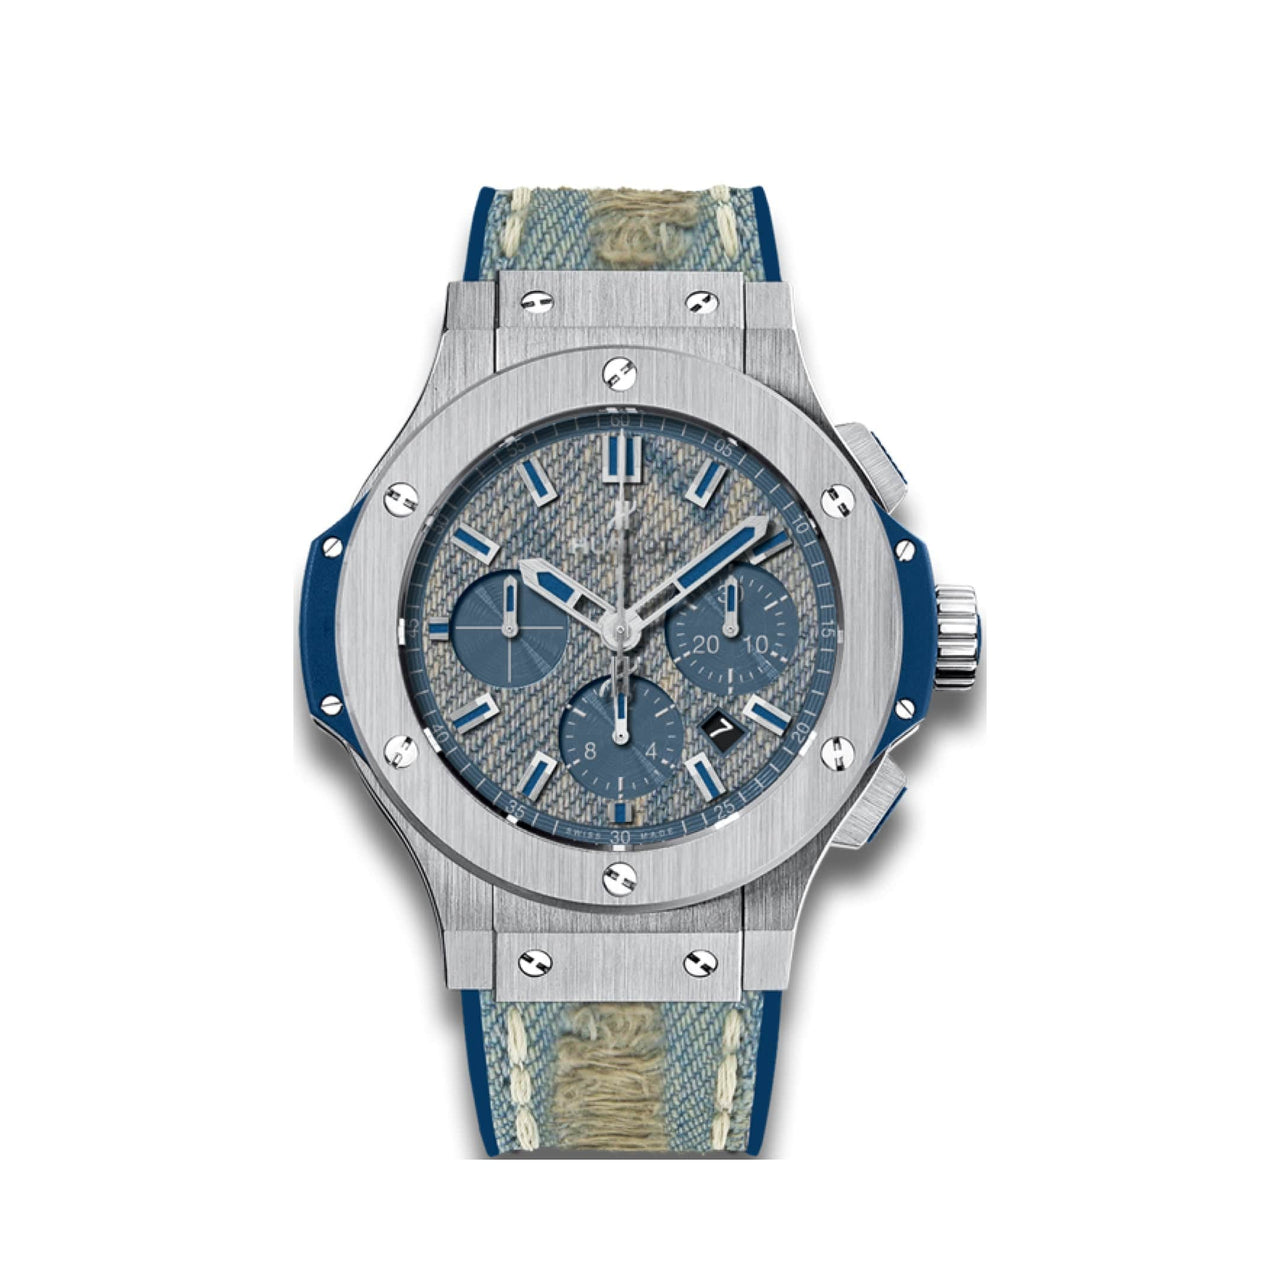 Hublot Big Bang "Jeans" Chronograph 301.SL.2770.NR.JEANS Stainless Steel Limited Edition